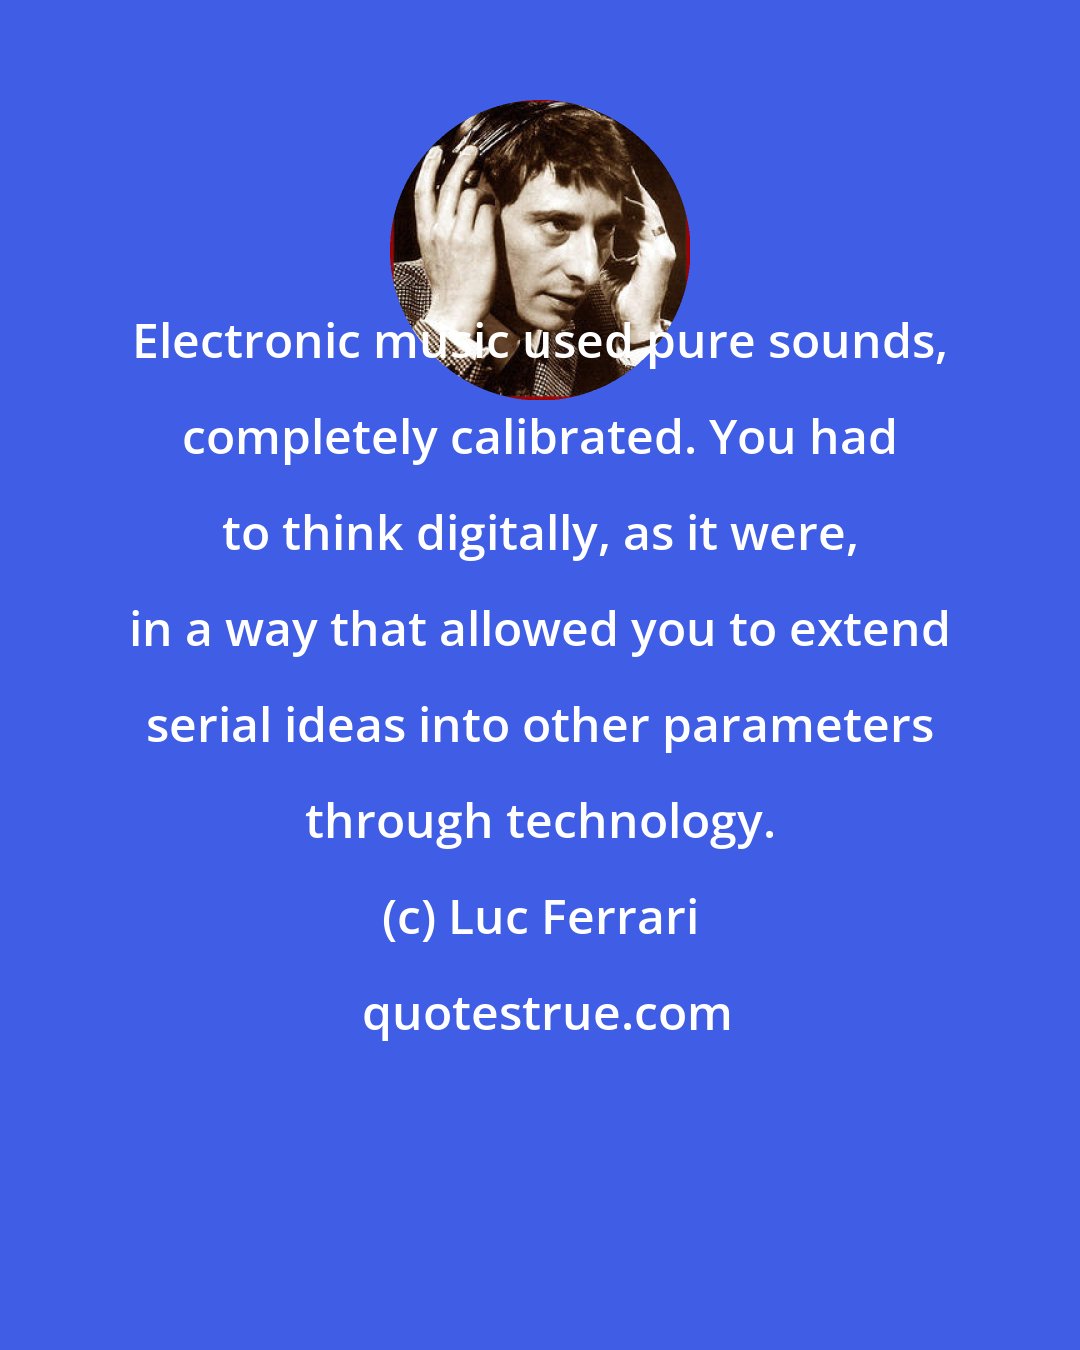 Luc Ferrari: Electronic music used pure sounds, completely calibrated. You had to think digitally, as it were, in a way that allowed you to extend serial ideas into other parameters through technology.